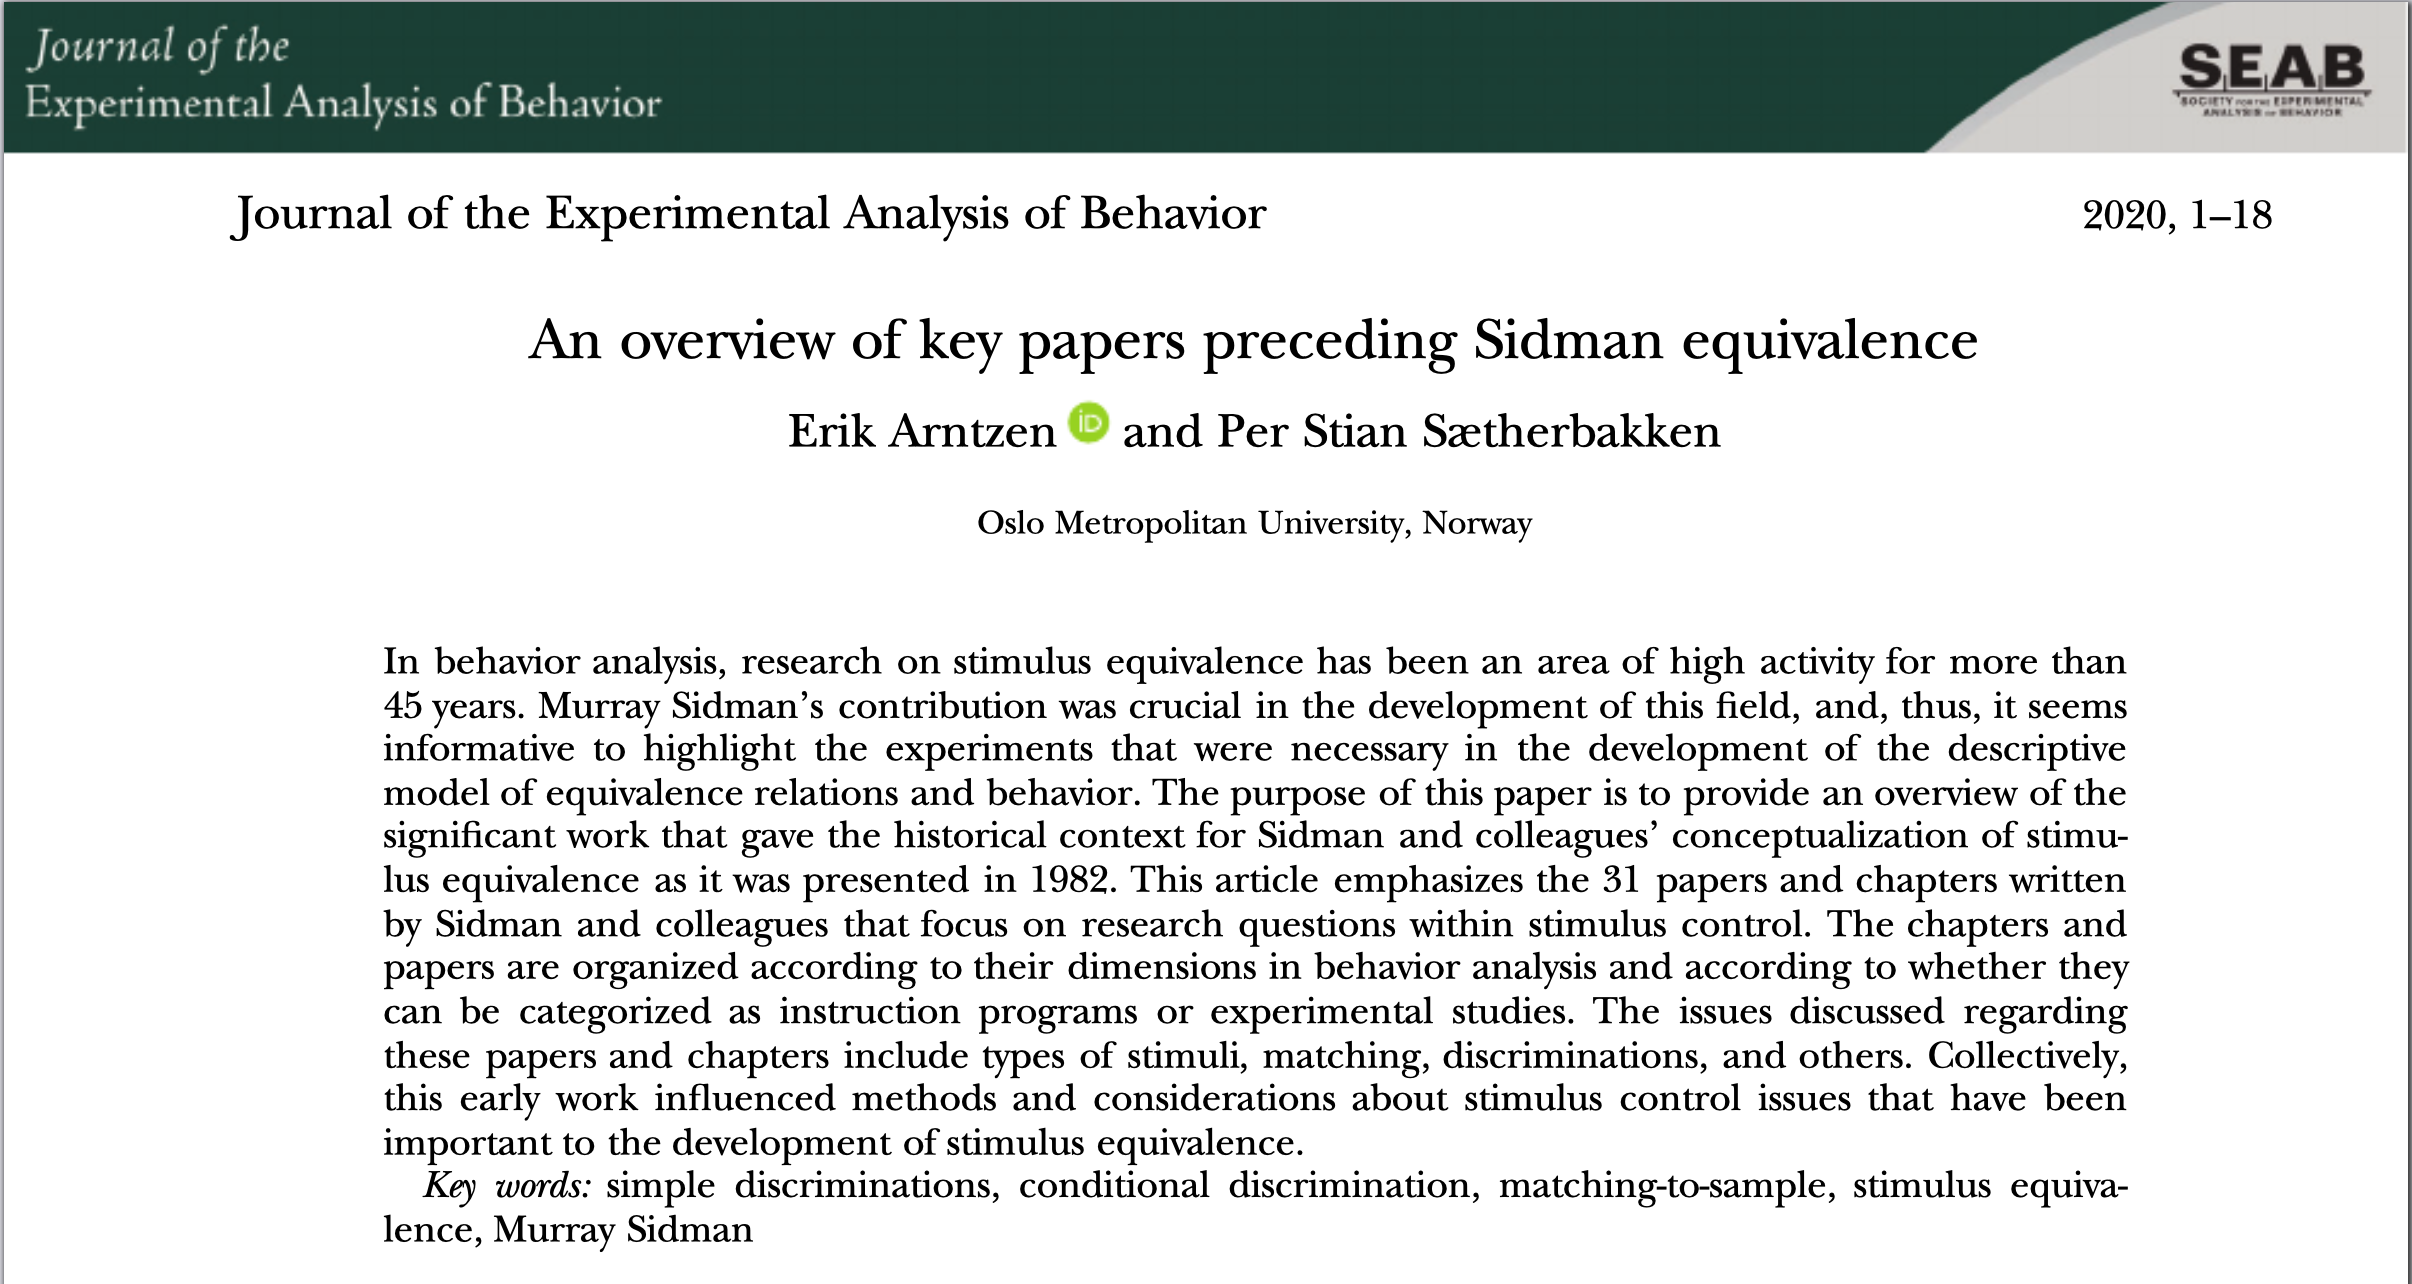 A paper published online in JEAB (special issue on the topic of Murray Sidman: A Retrospective Appreciation of a Distinguished Scientist)